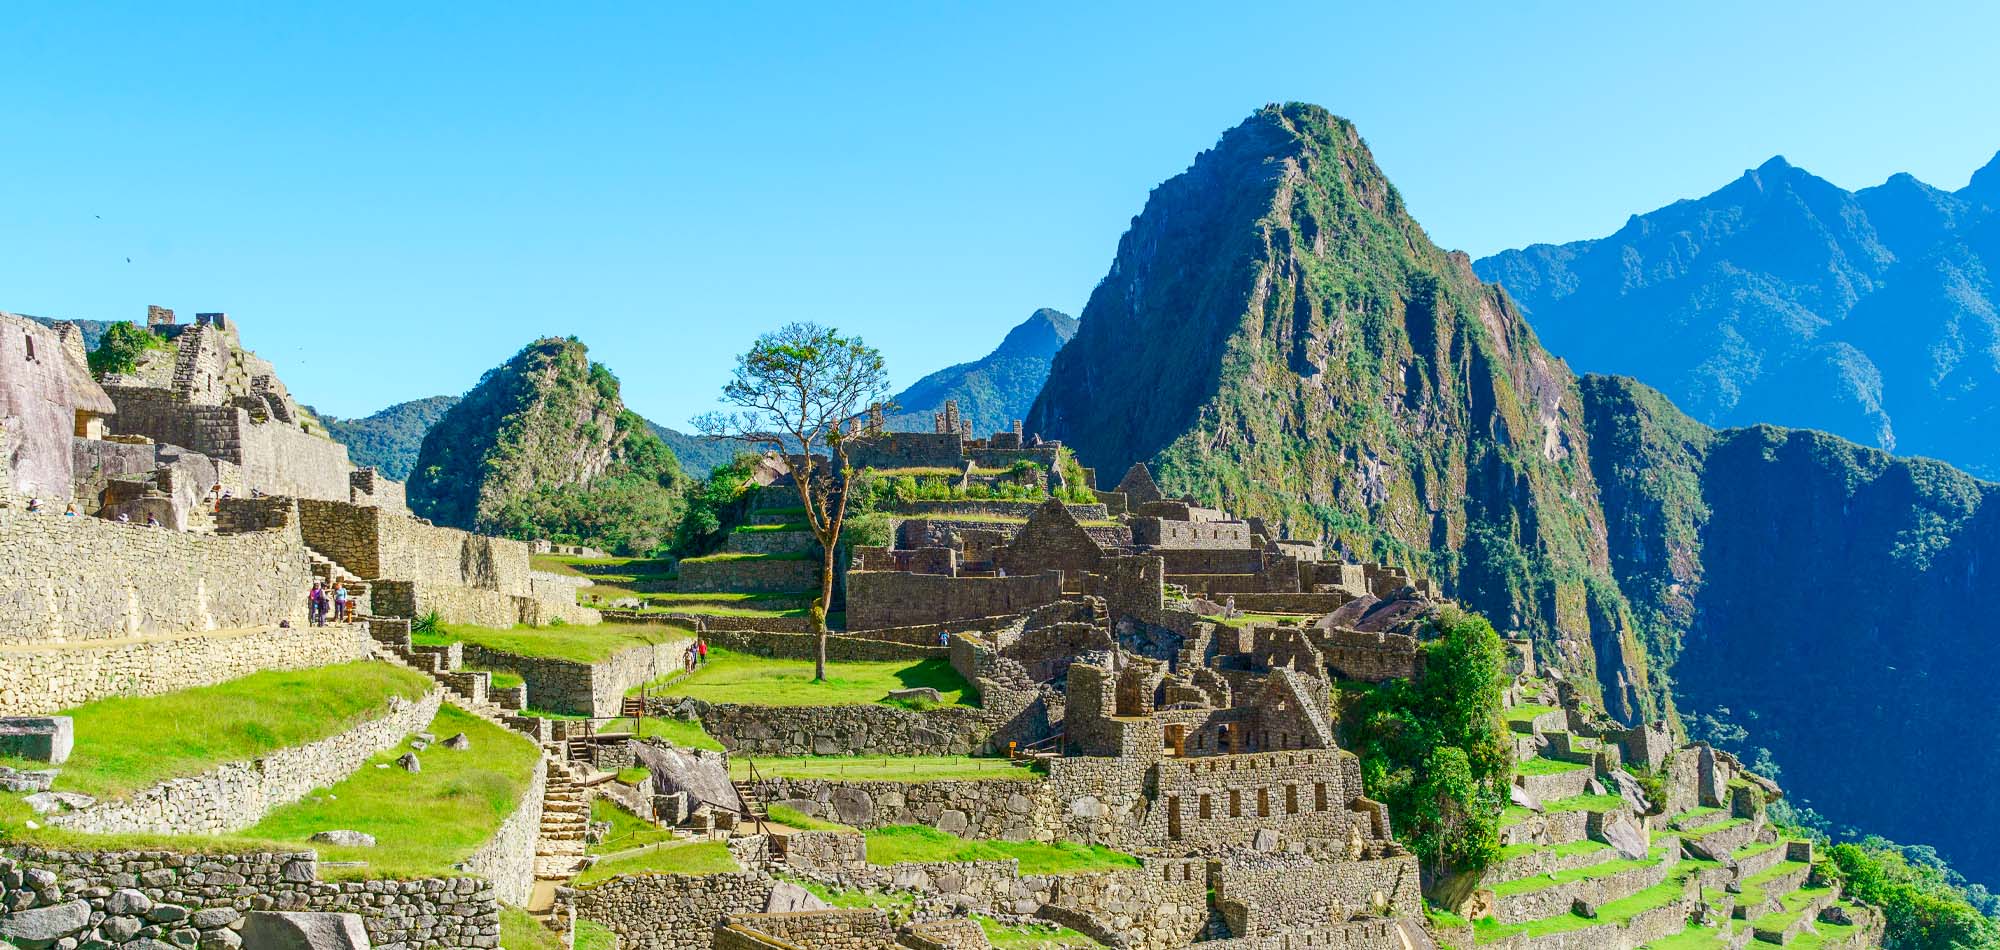 The 7 TOP Rated Treks to Machu Picchu